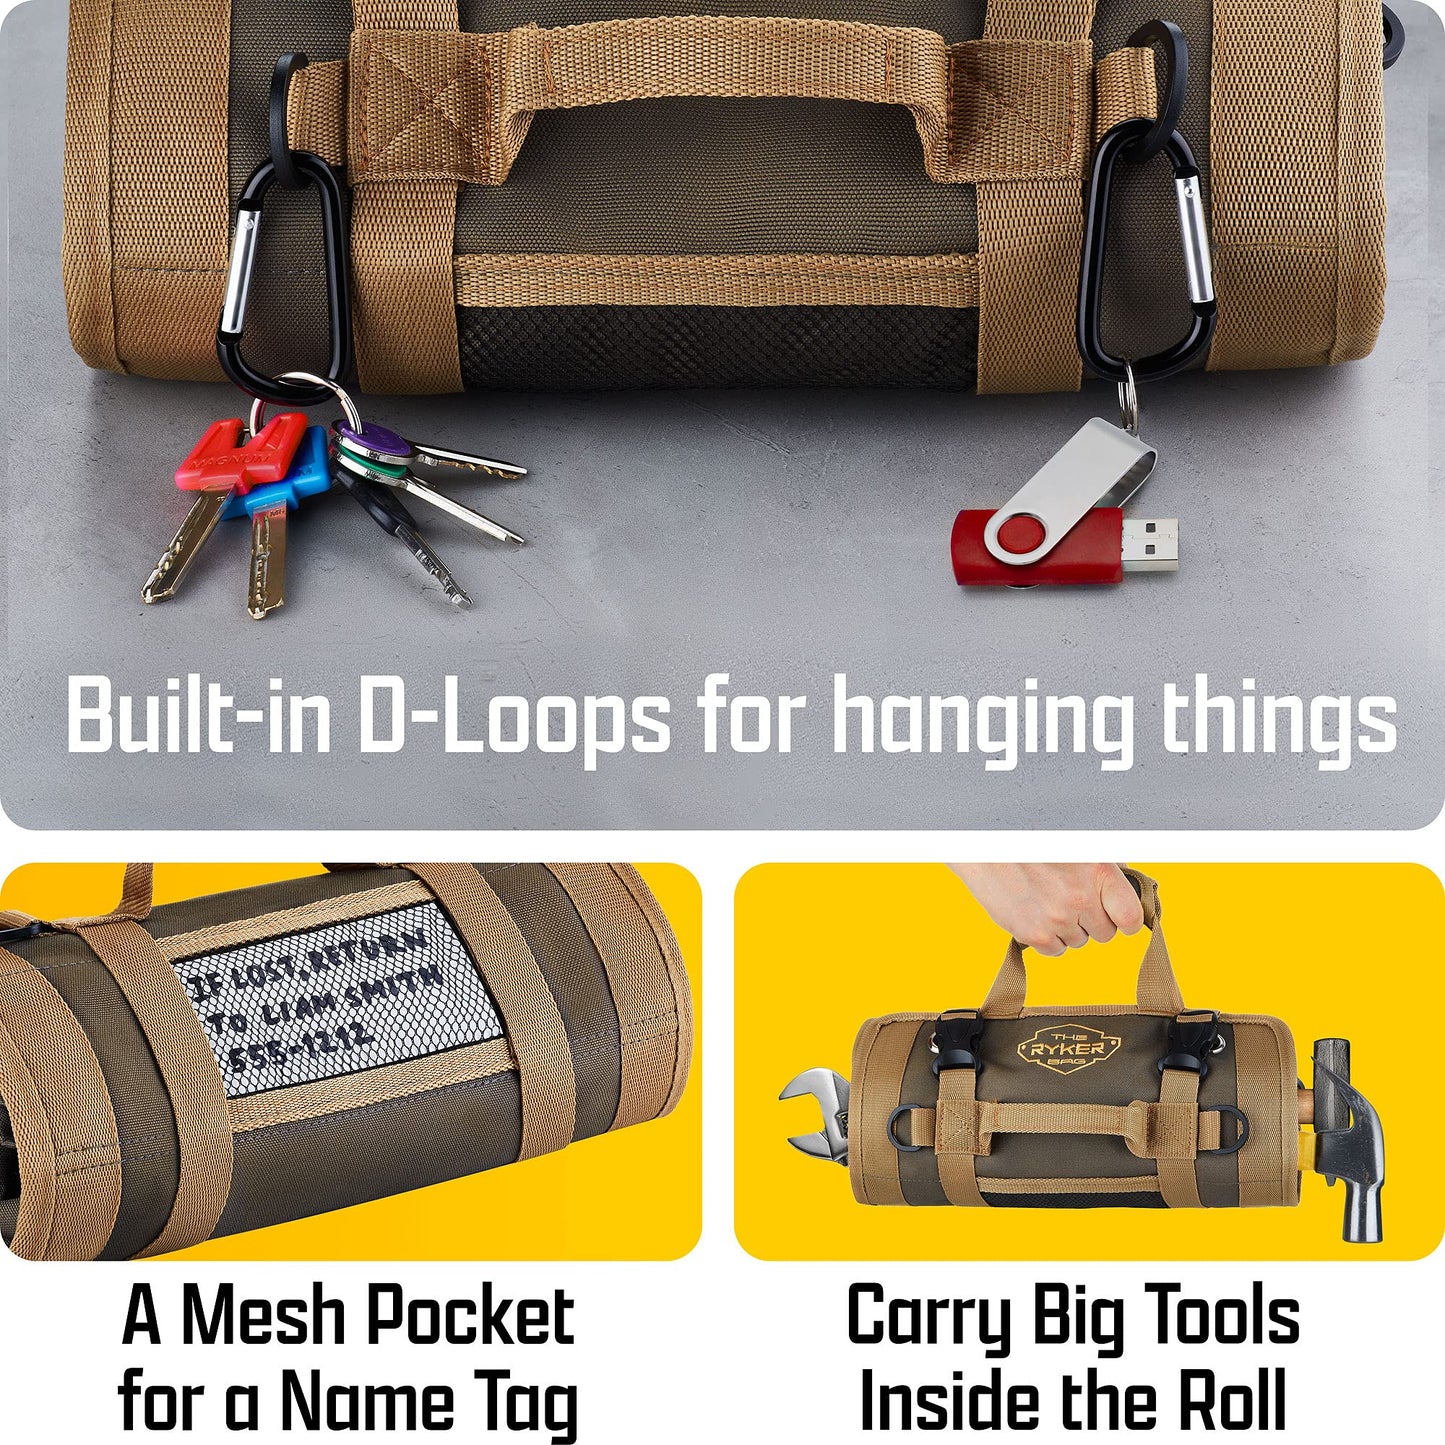 The Ryker Bag Tool Organizers - Small Tool Bag W/Detachable Pouches, Heavy Duty Roll Up Tool Bag Organizer : 6 Tool Pouches - Gifts for Dad Tool Roll